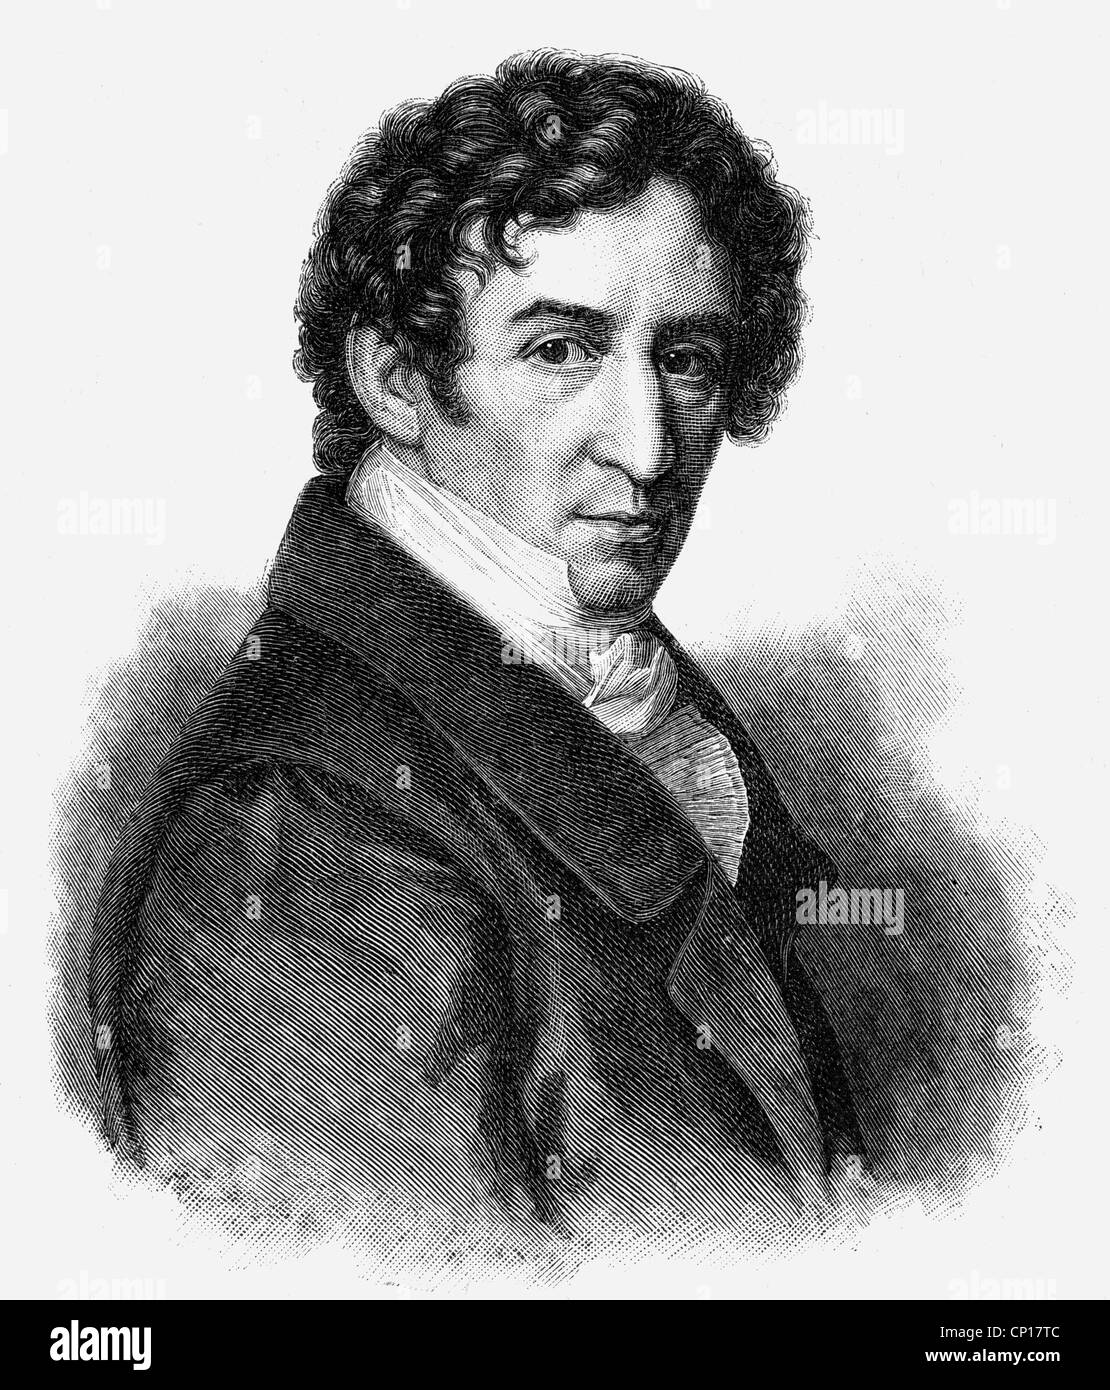 Devrient, Ludwig, 15.12.1784 - 30.12.1832, German actor and theatre critic, portrait, wood engraving after drawing by F. C. Gröger, 1822, Stock Photo